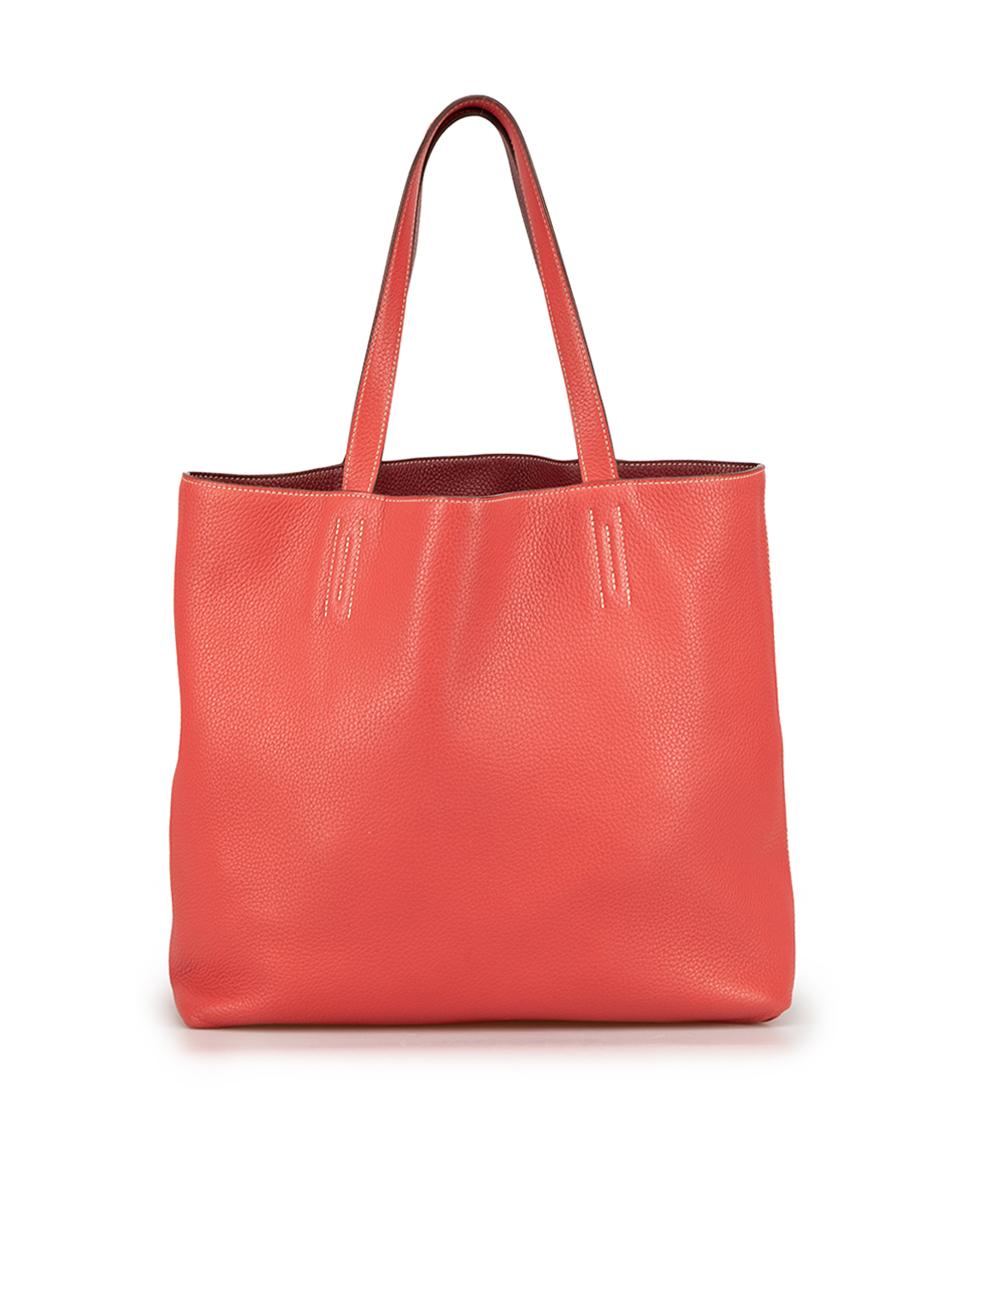 Hermès 2014 Red Reversible Double Sens 36 Clemence Tote In Good Condition For Sale In London, GB